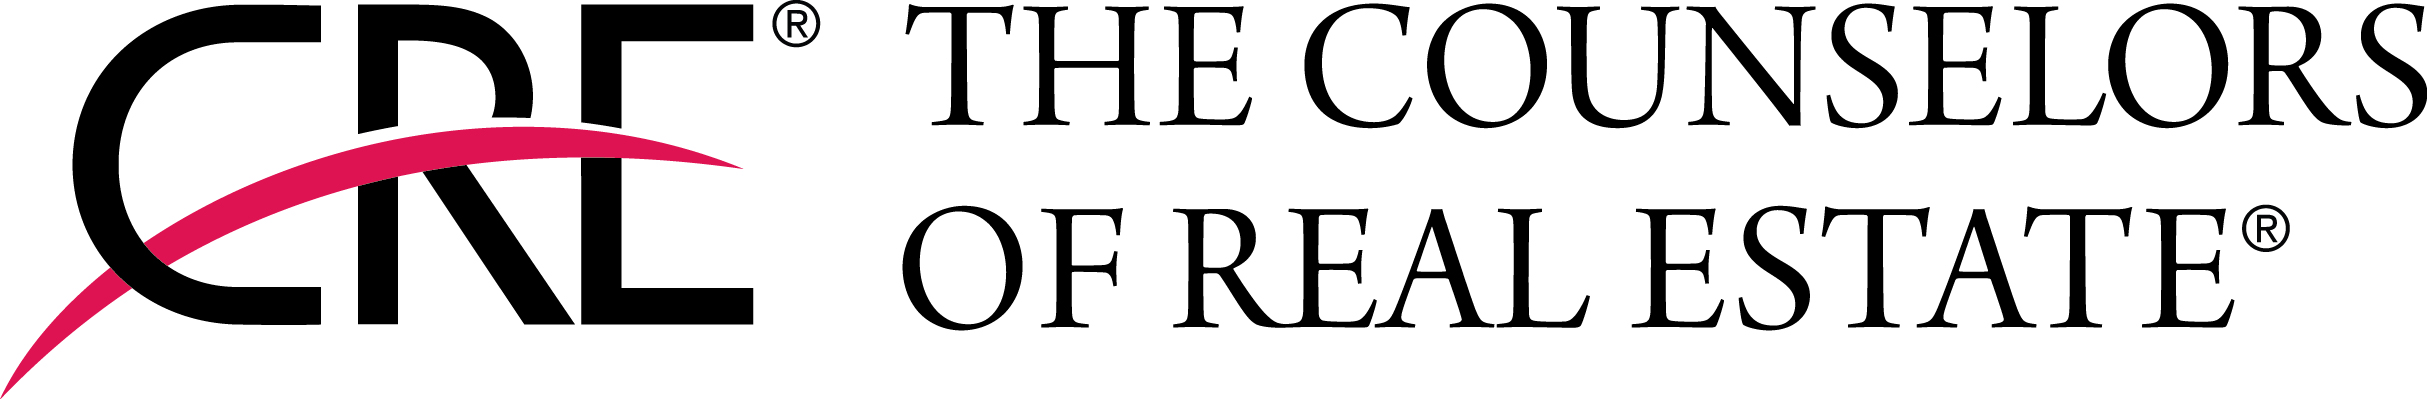 The Counselors of Real Estate logo